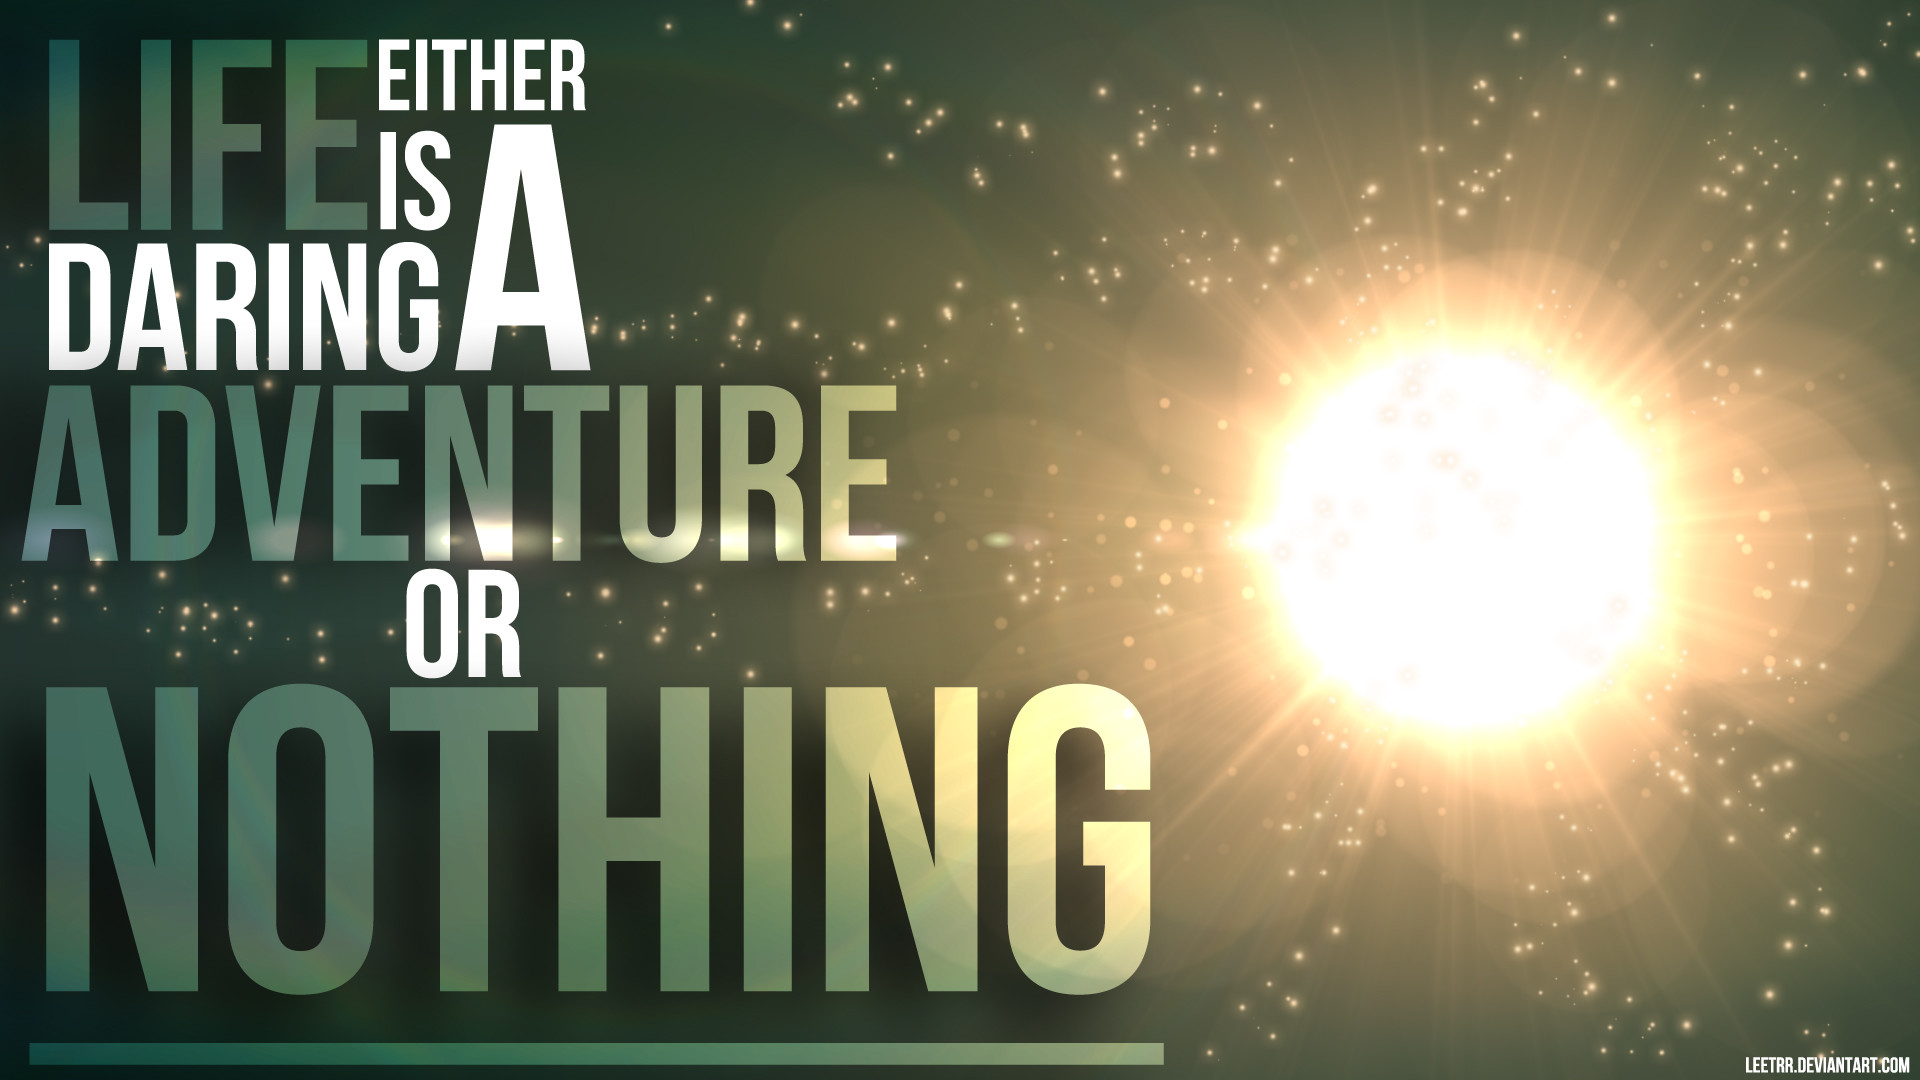 1920x1080 Inspirational Wallpaper on Life and Adventure: Life either is a adventure